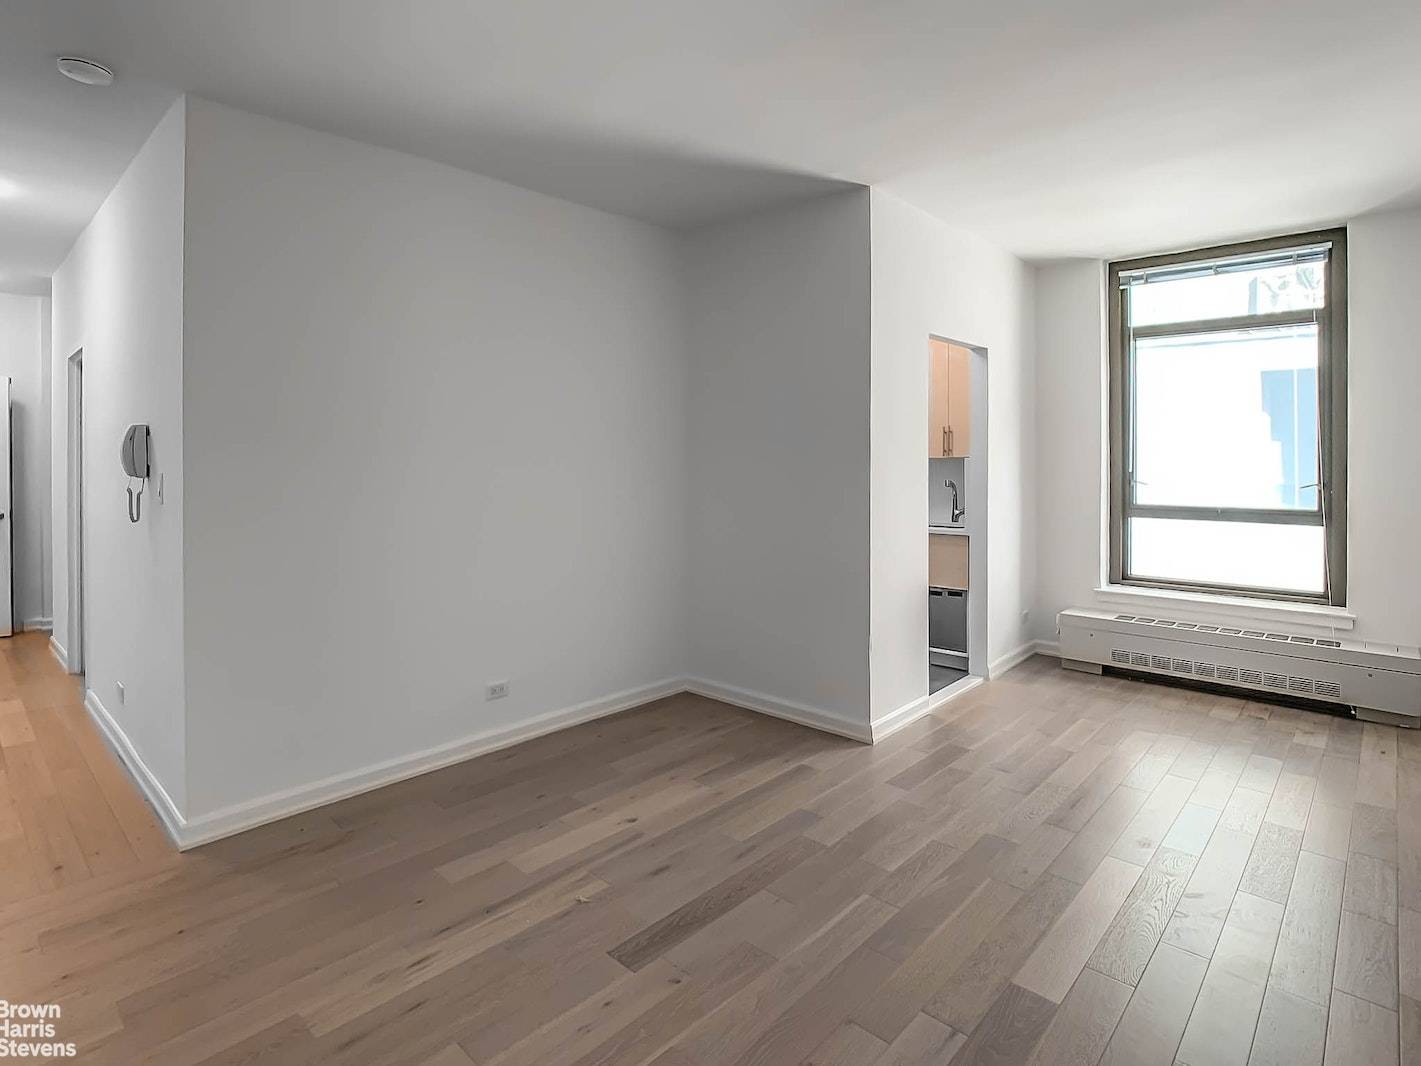 Completely renovated, spacious one bedroom apartment with extra large windows.